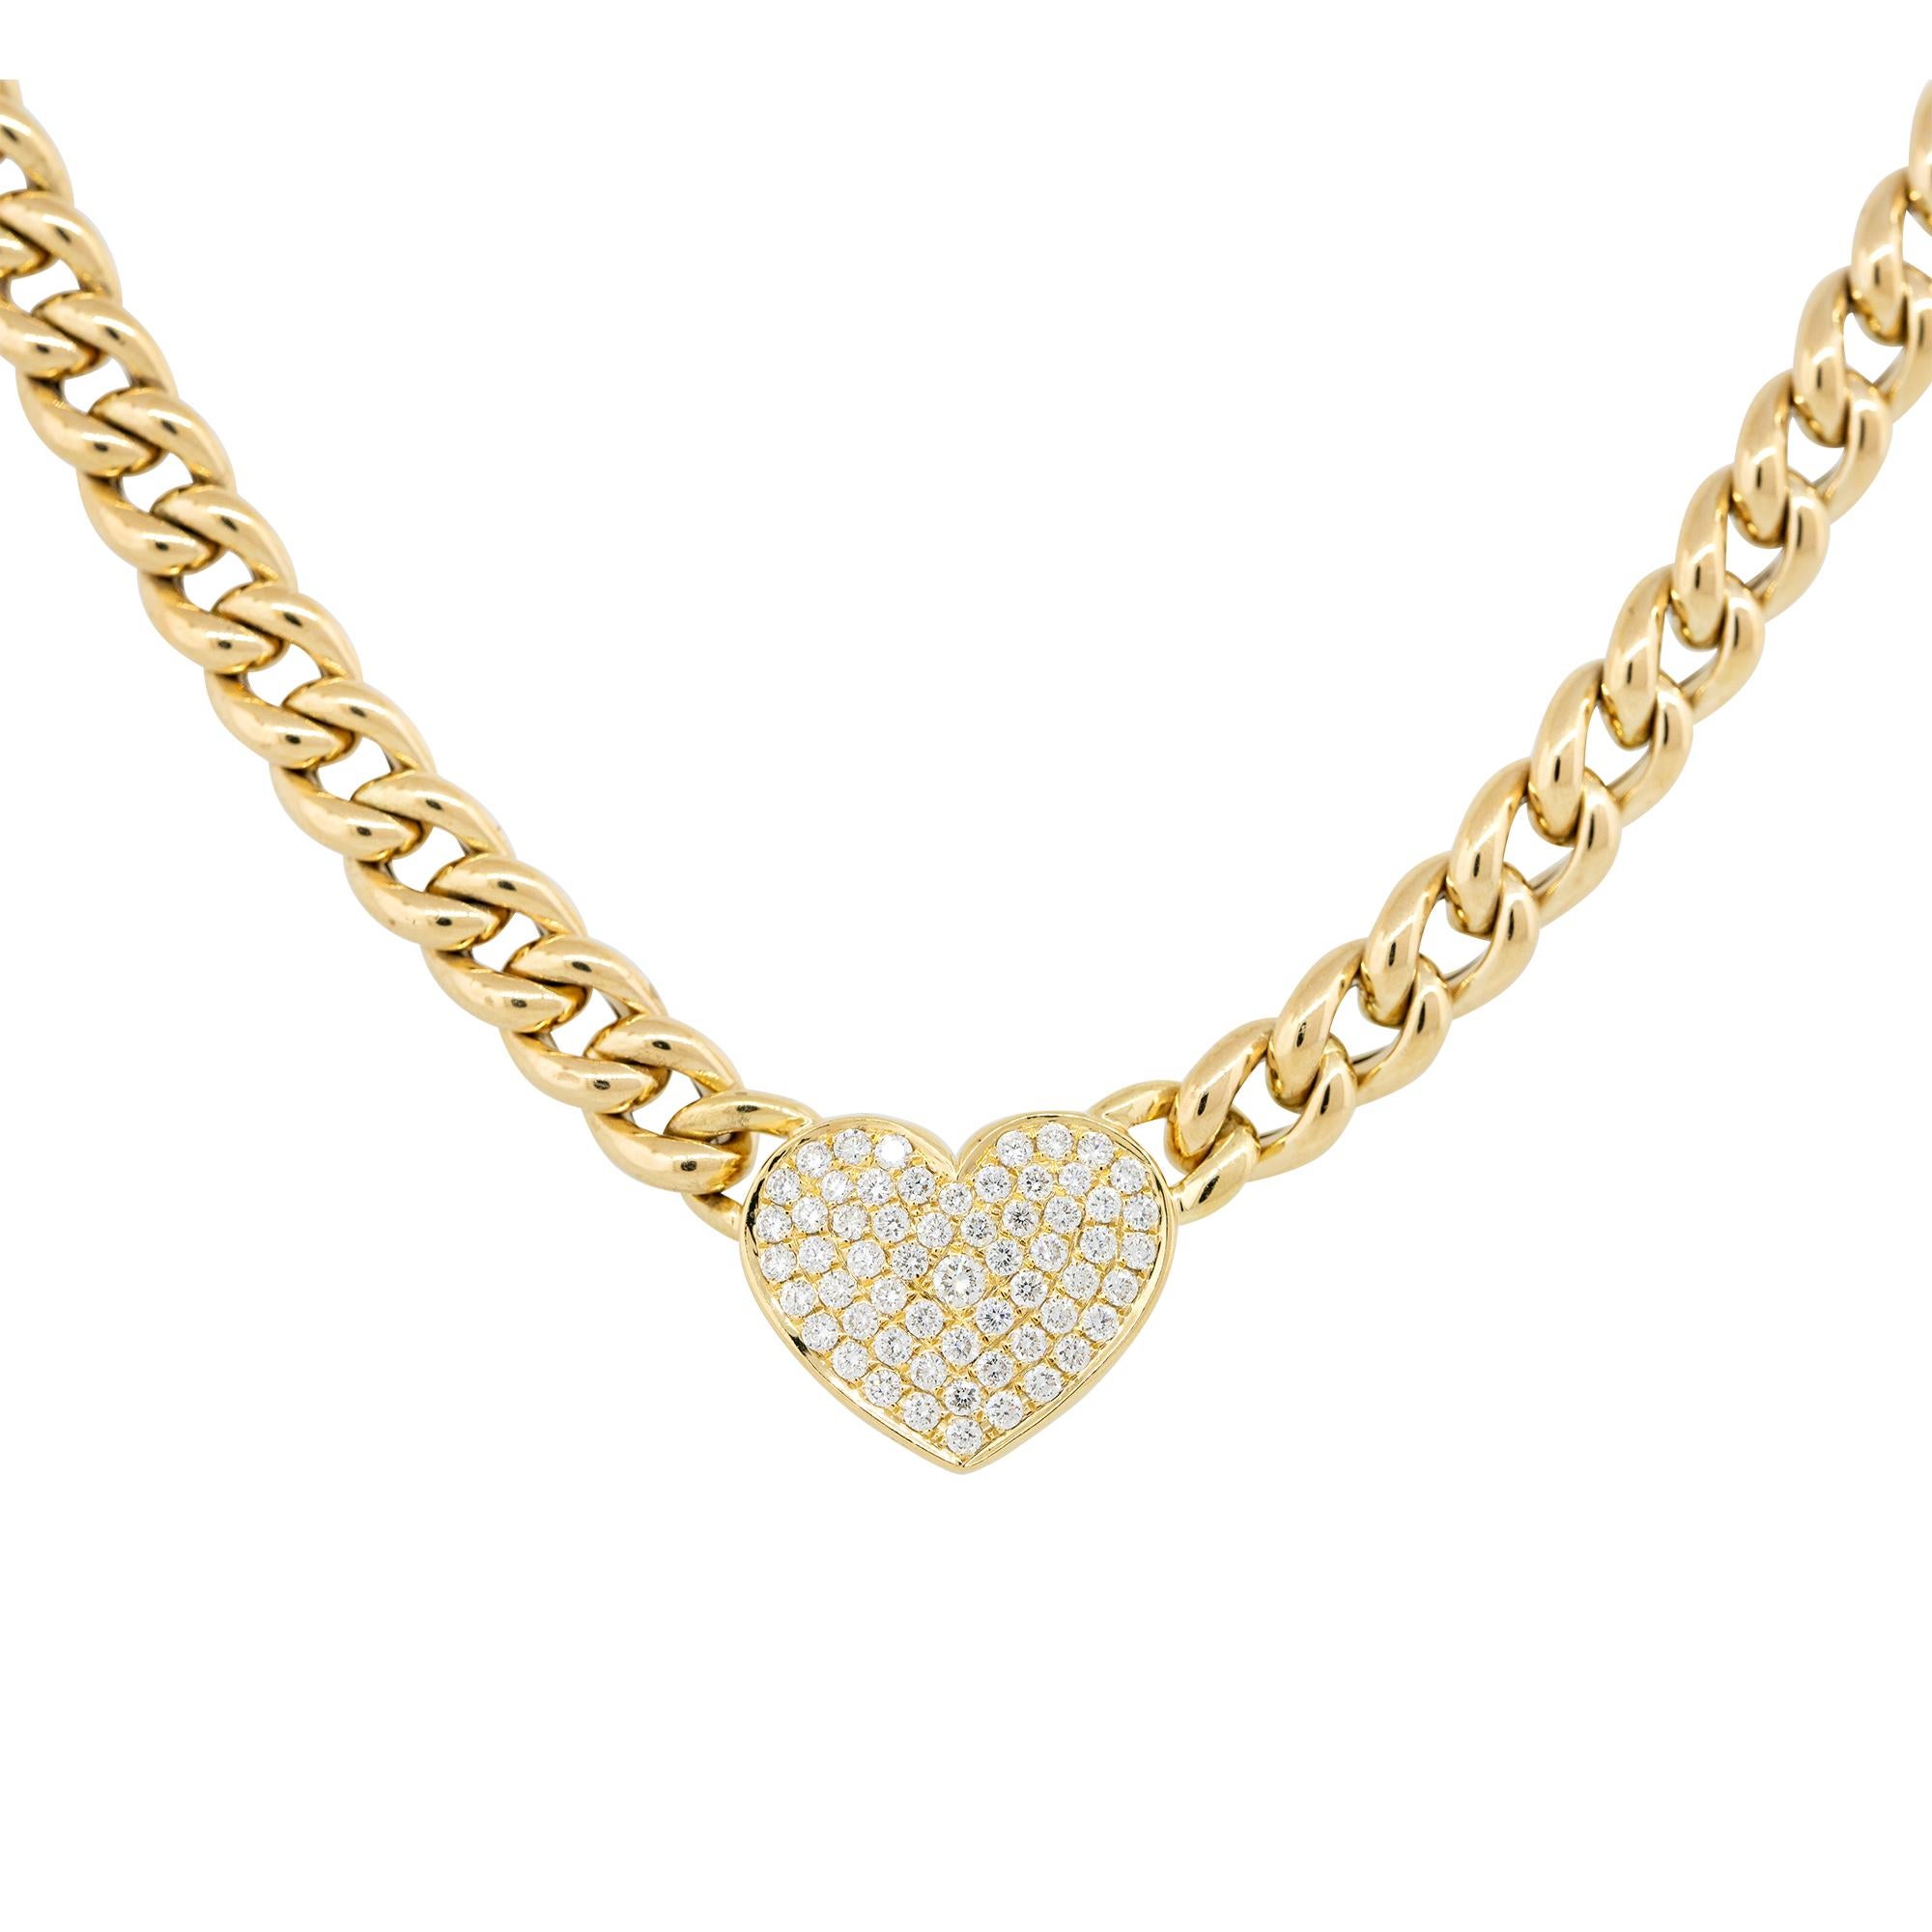 0.67 Carat Pave Diamond Heart on Curb Link Necklace 18 Karat In Stock In Excellent Condition For Sale In Boca Raton, FL